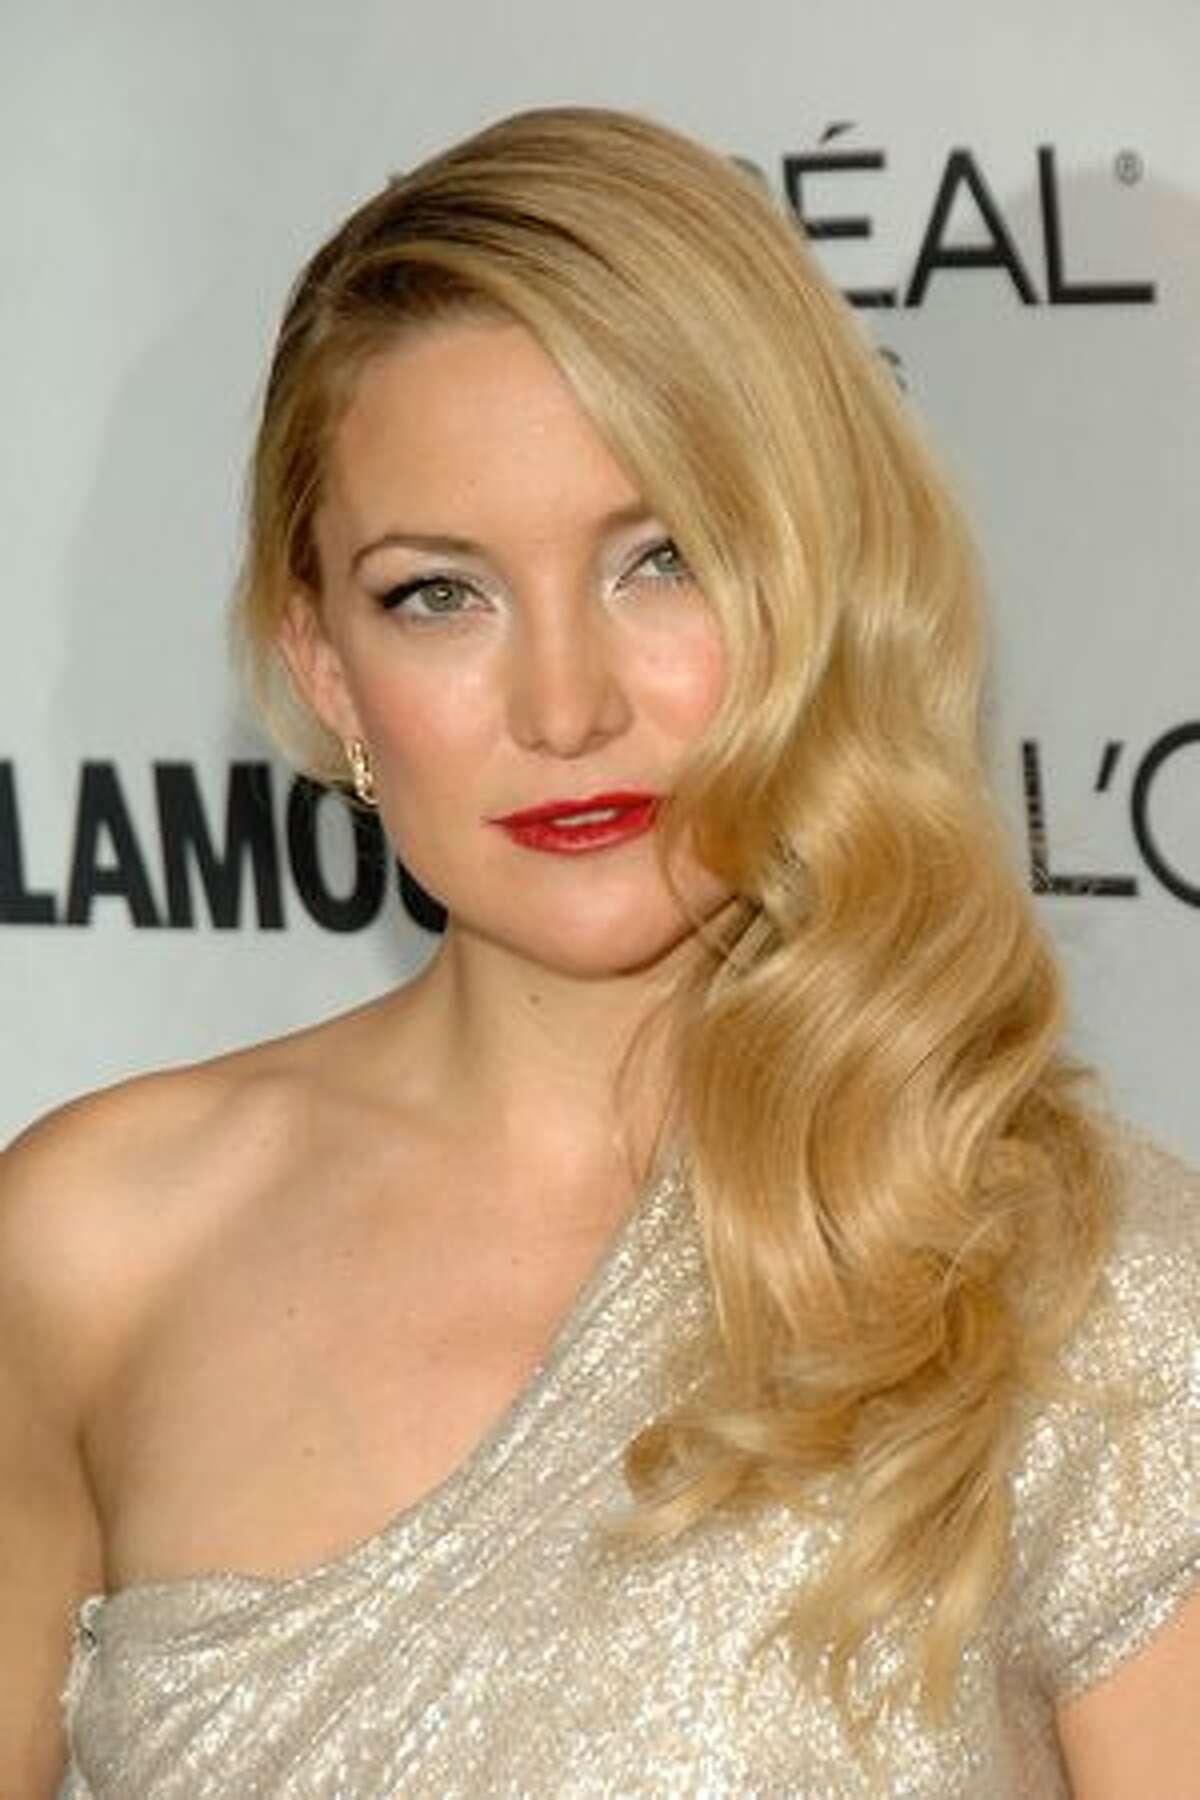 Kate Hudson announced she's pregnant with the baby of boyfriend and Muse front man, Matthew Bellamy.